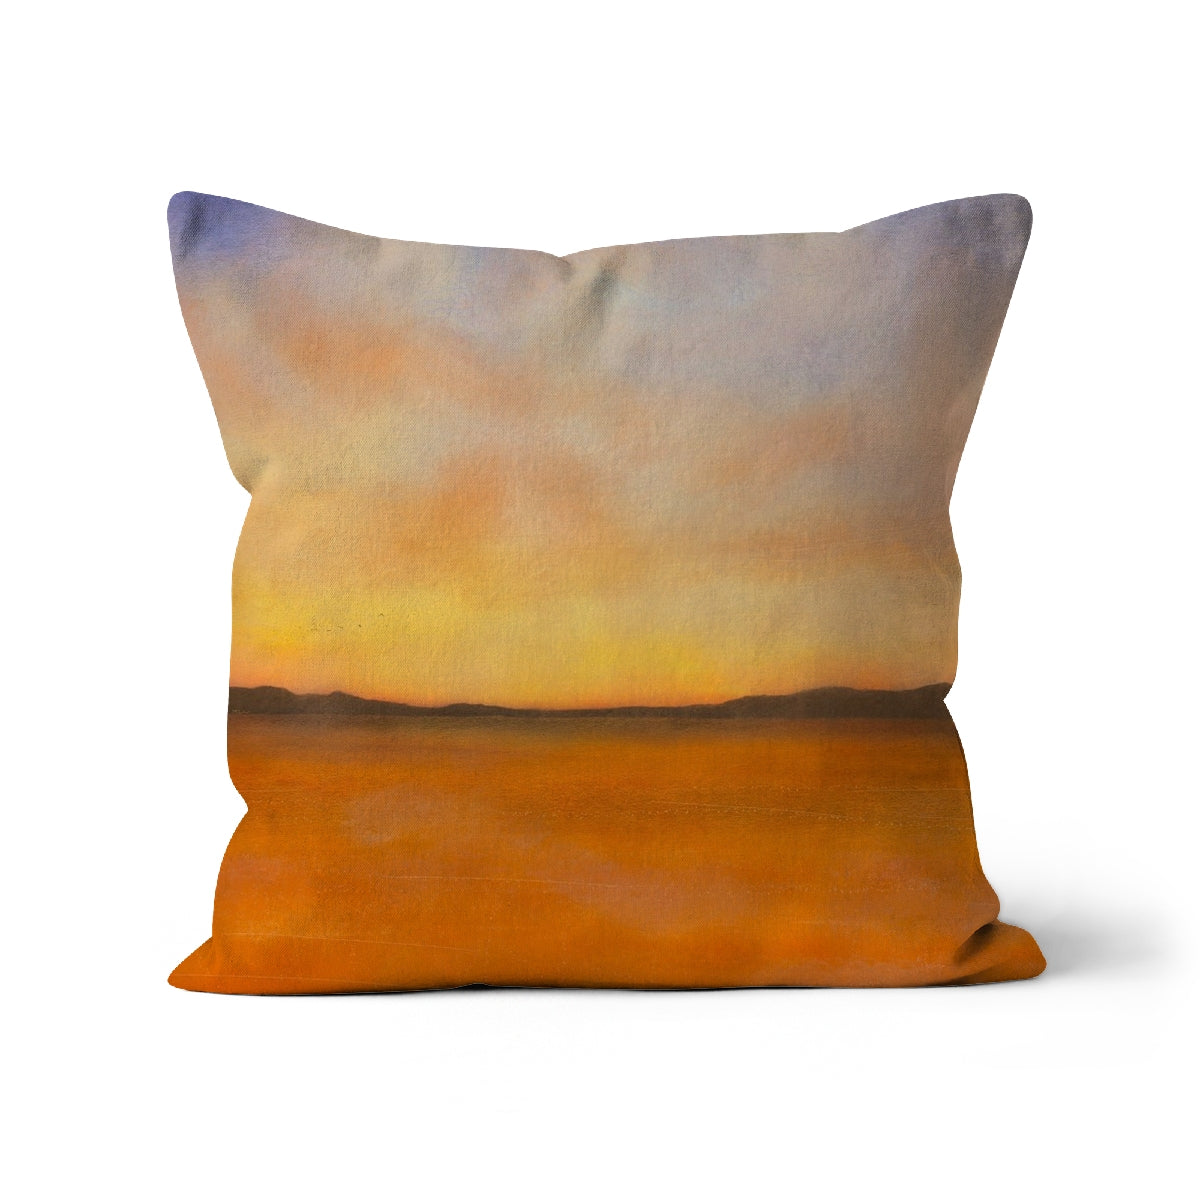 Islay Dawn Art Gifts Cushion-Cushions-Hebridean Islands Art Gallery-Linen-18"x18"-Paintings, Prints, Homeware, Art Gifts From Scotland By Scottish Artist Kevin Hunter